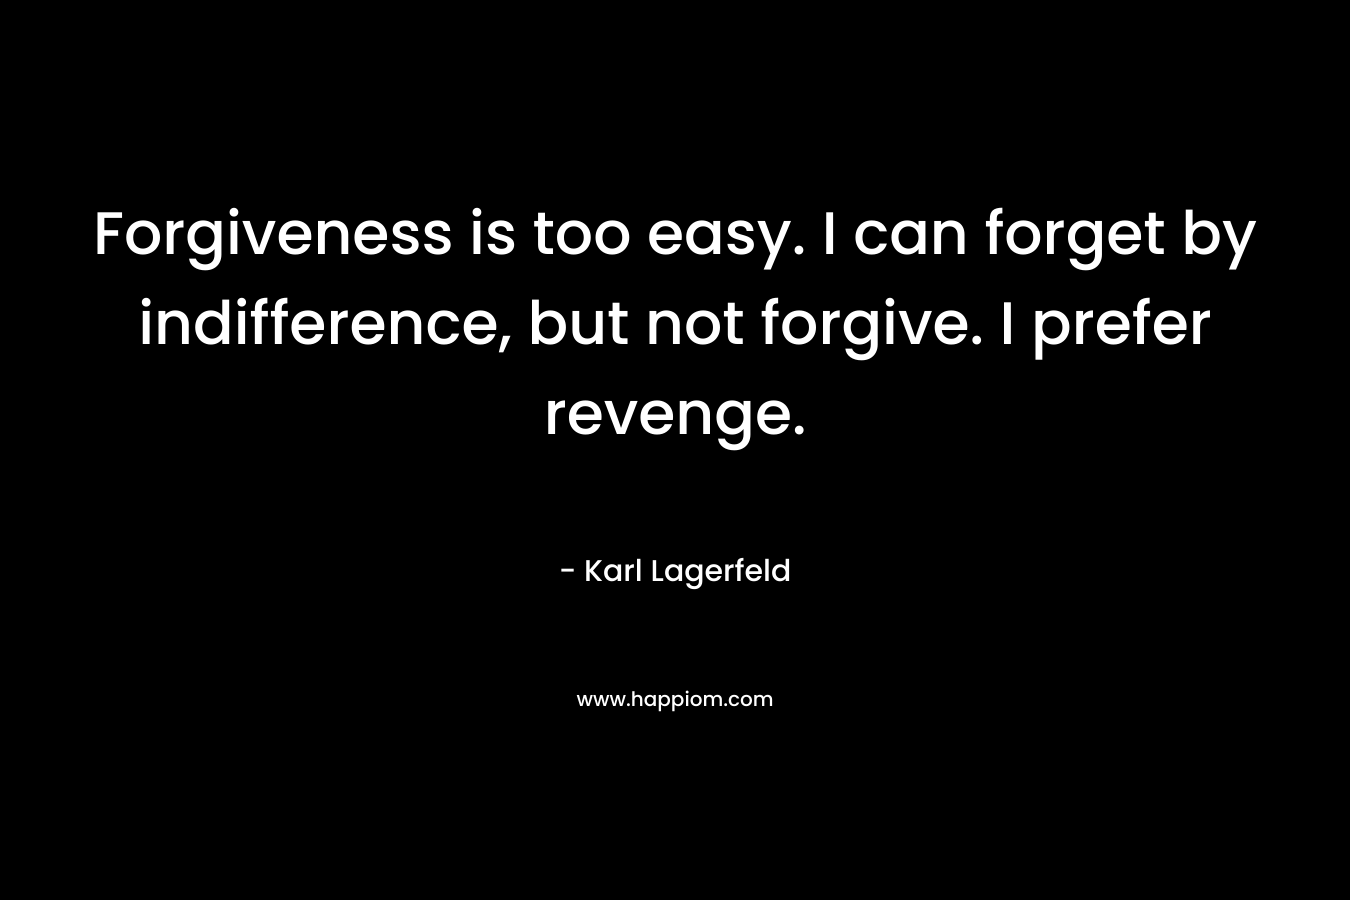 Forgiveness is too easy. I can forget by indifference, but not forgive. I prefer revenge. – Karl Lagerfeld